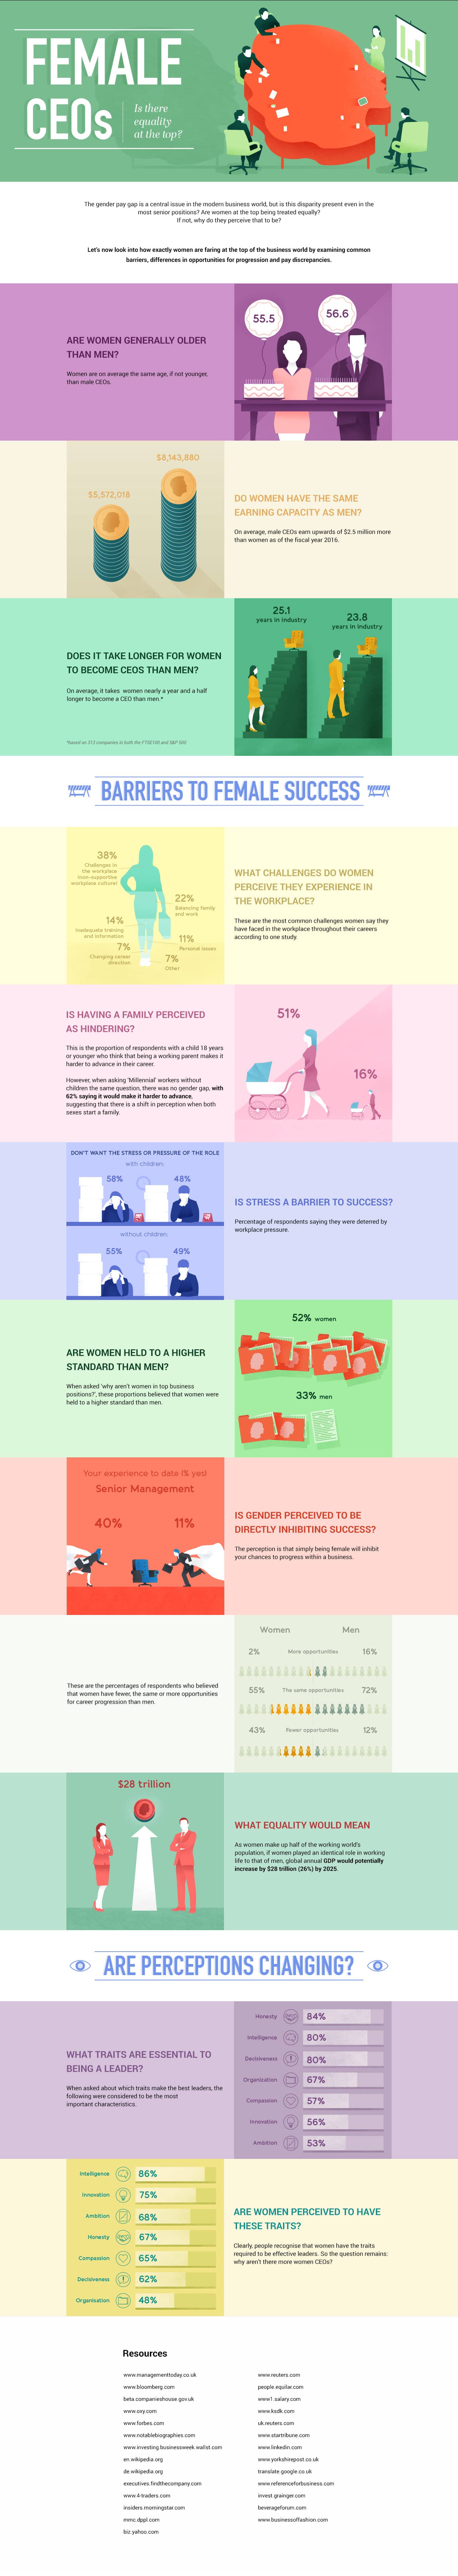 Women Business CEOs & Executives in the Workplace Statistics (Infographic)